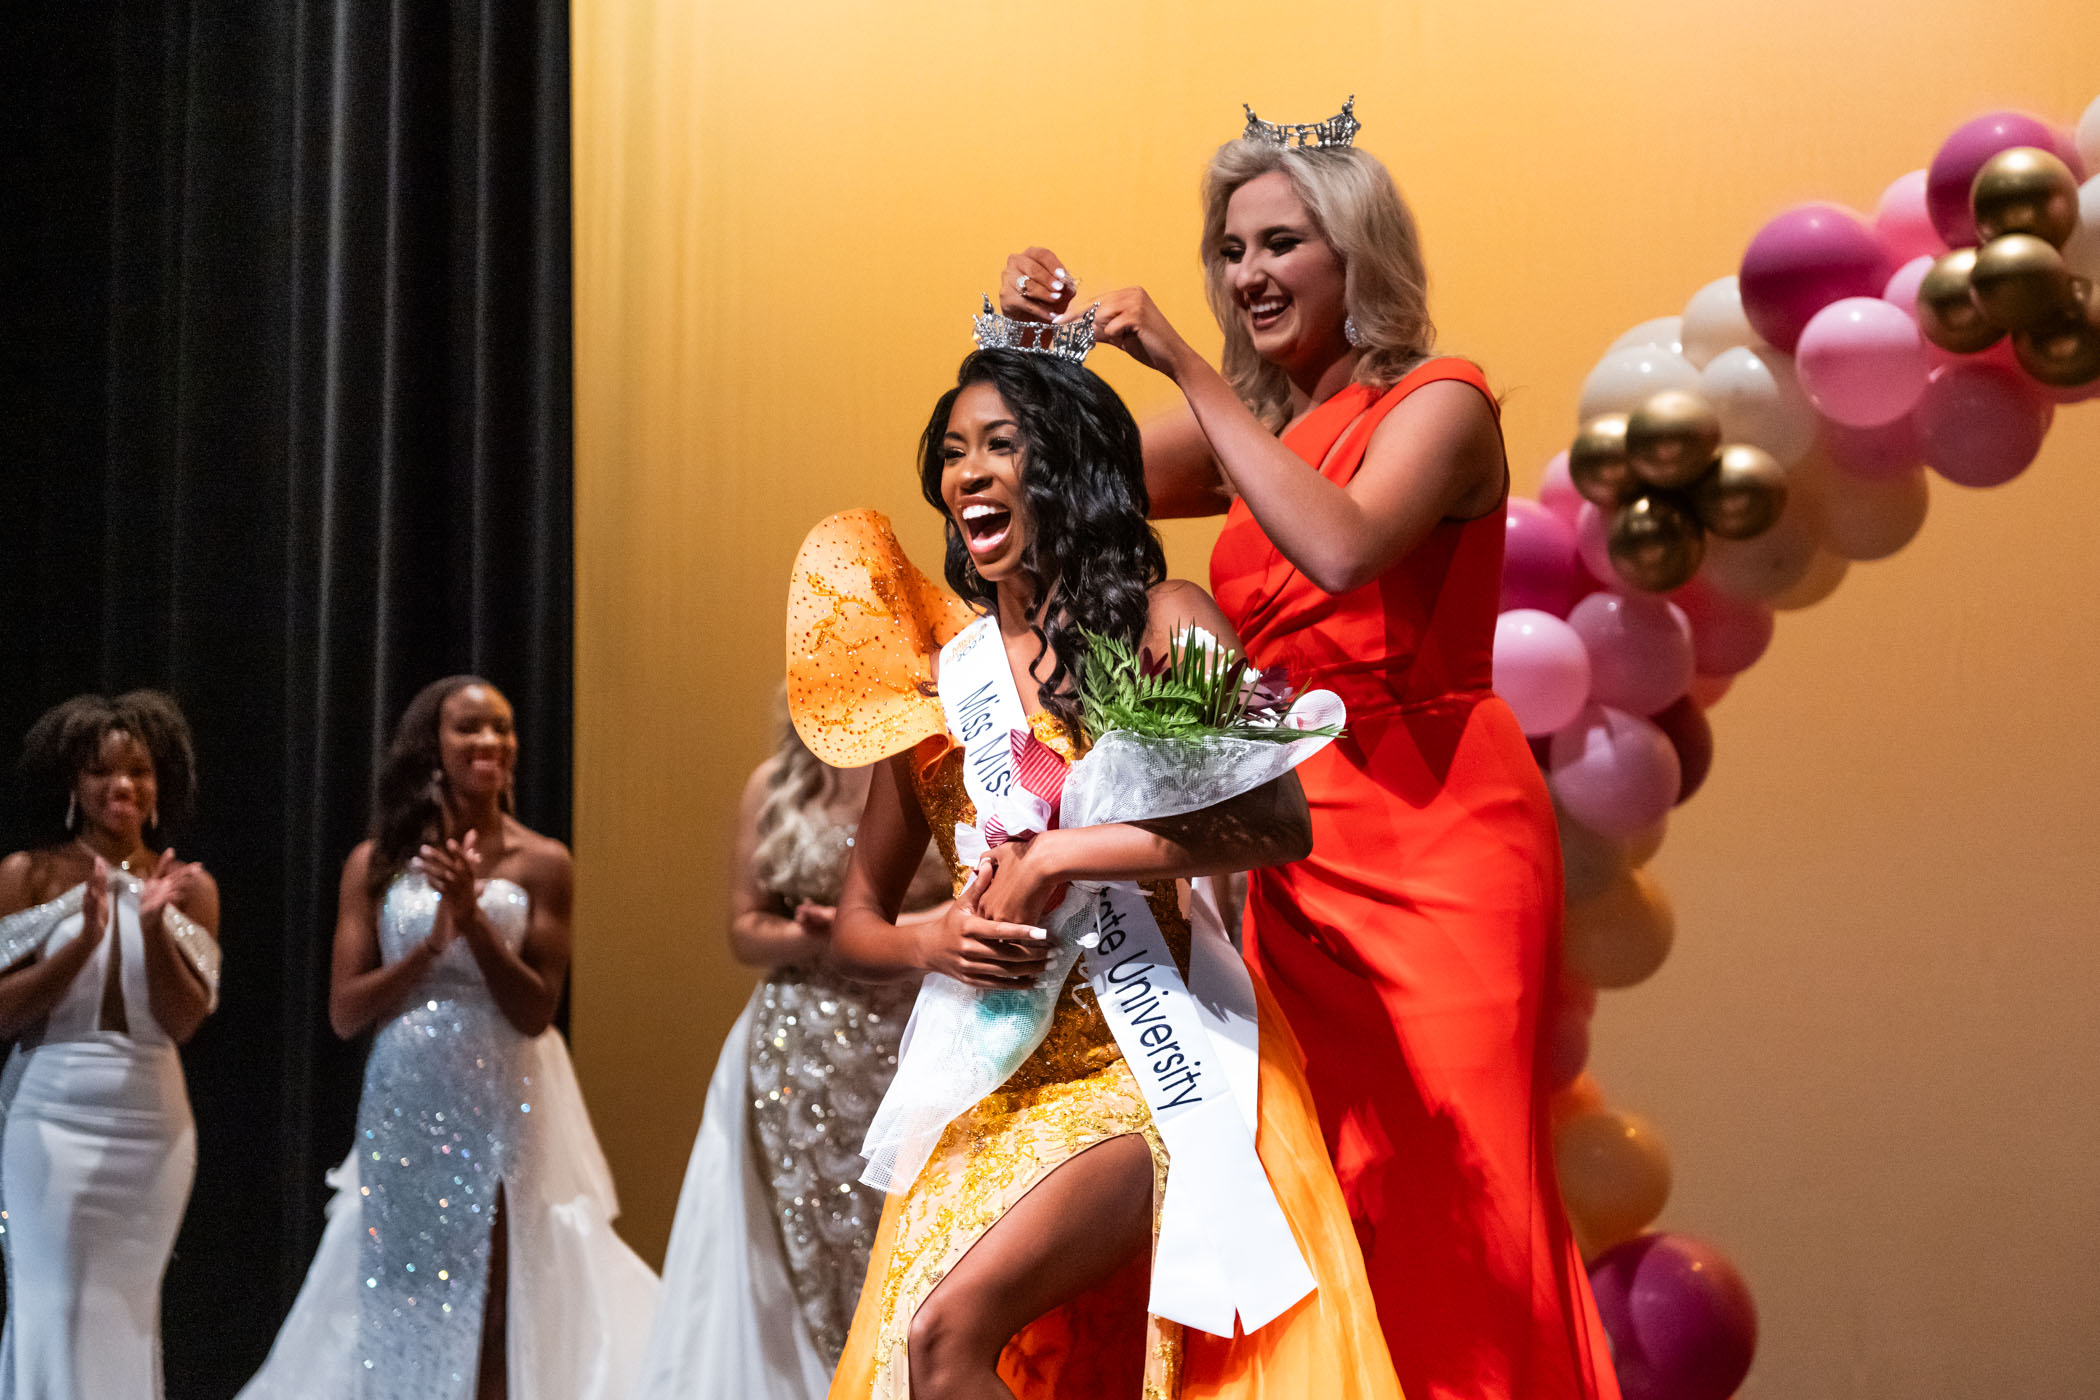 The winner is crowned on a beauty pageant stage